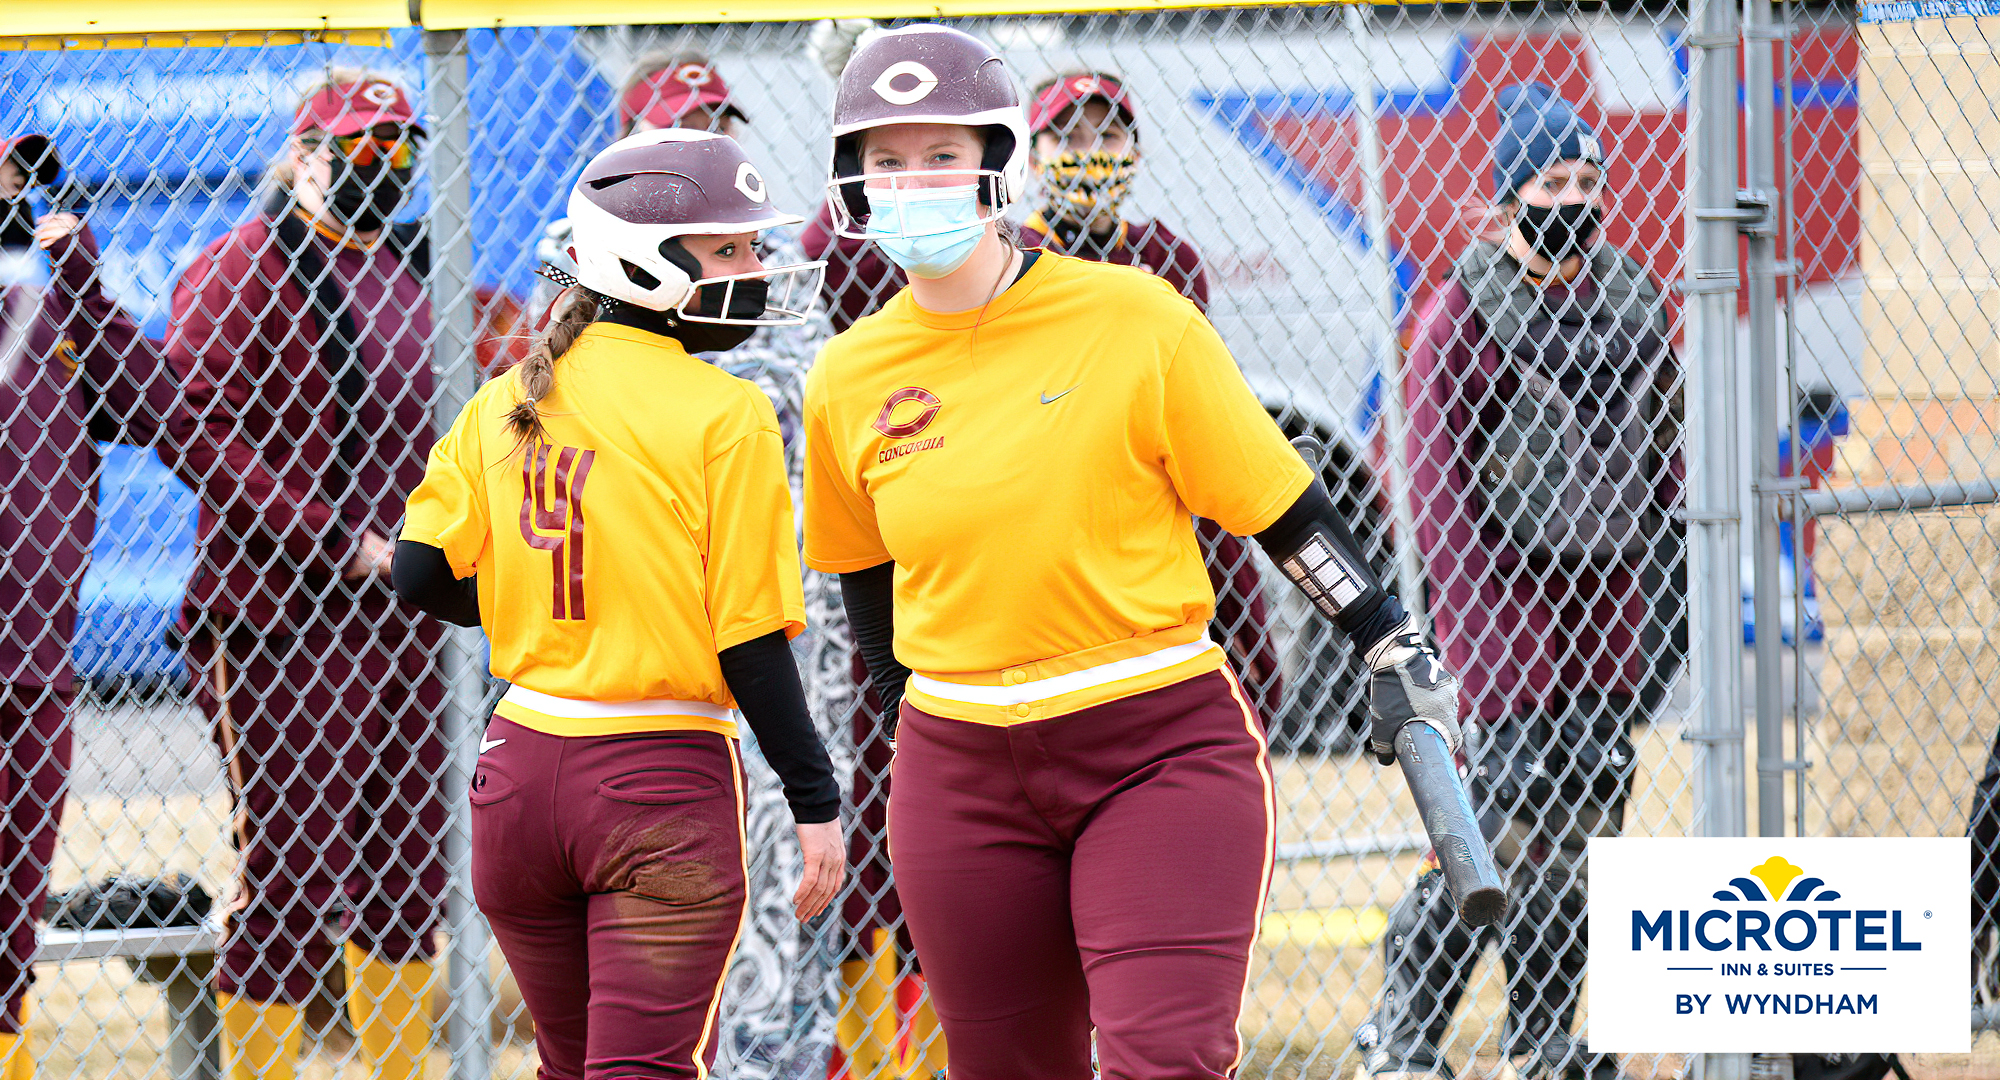 Senior Taylor Erholtz hit a home run in both games of the Cobbers' DH at previously nationally ranked St. Olaf.